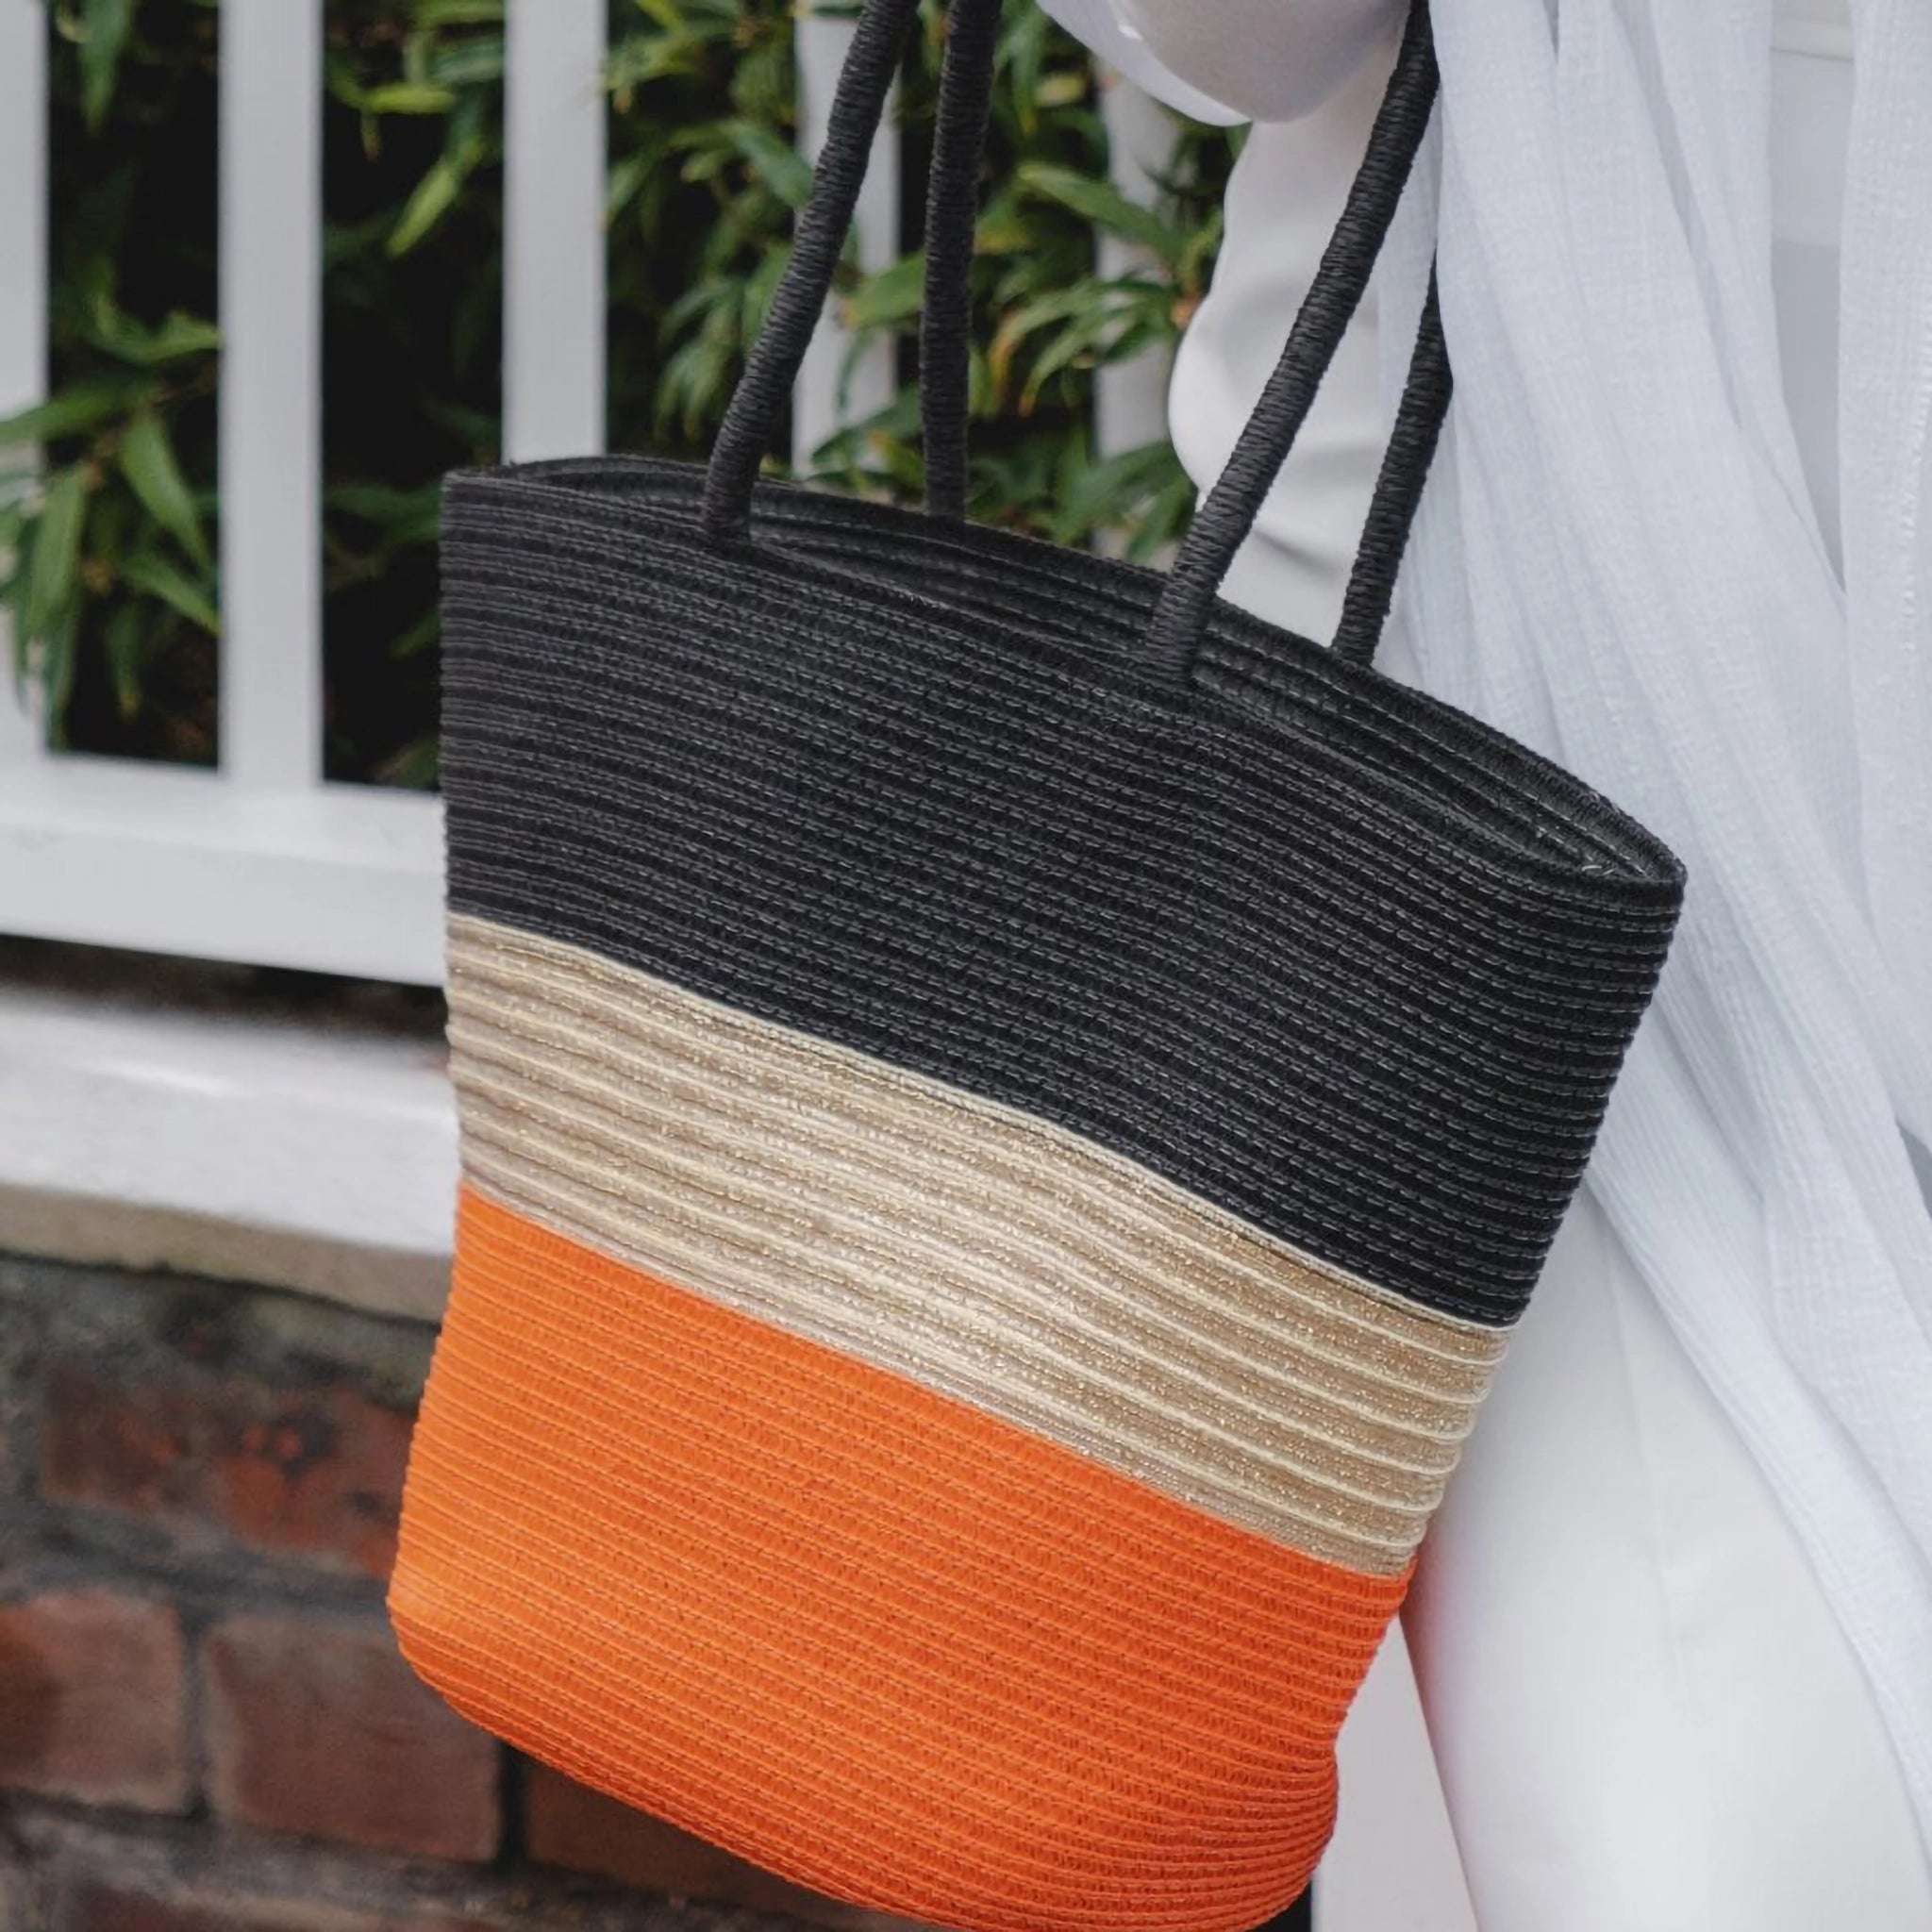 Model holding a woven summer tote bag with black, natural and orange stripes